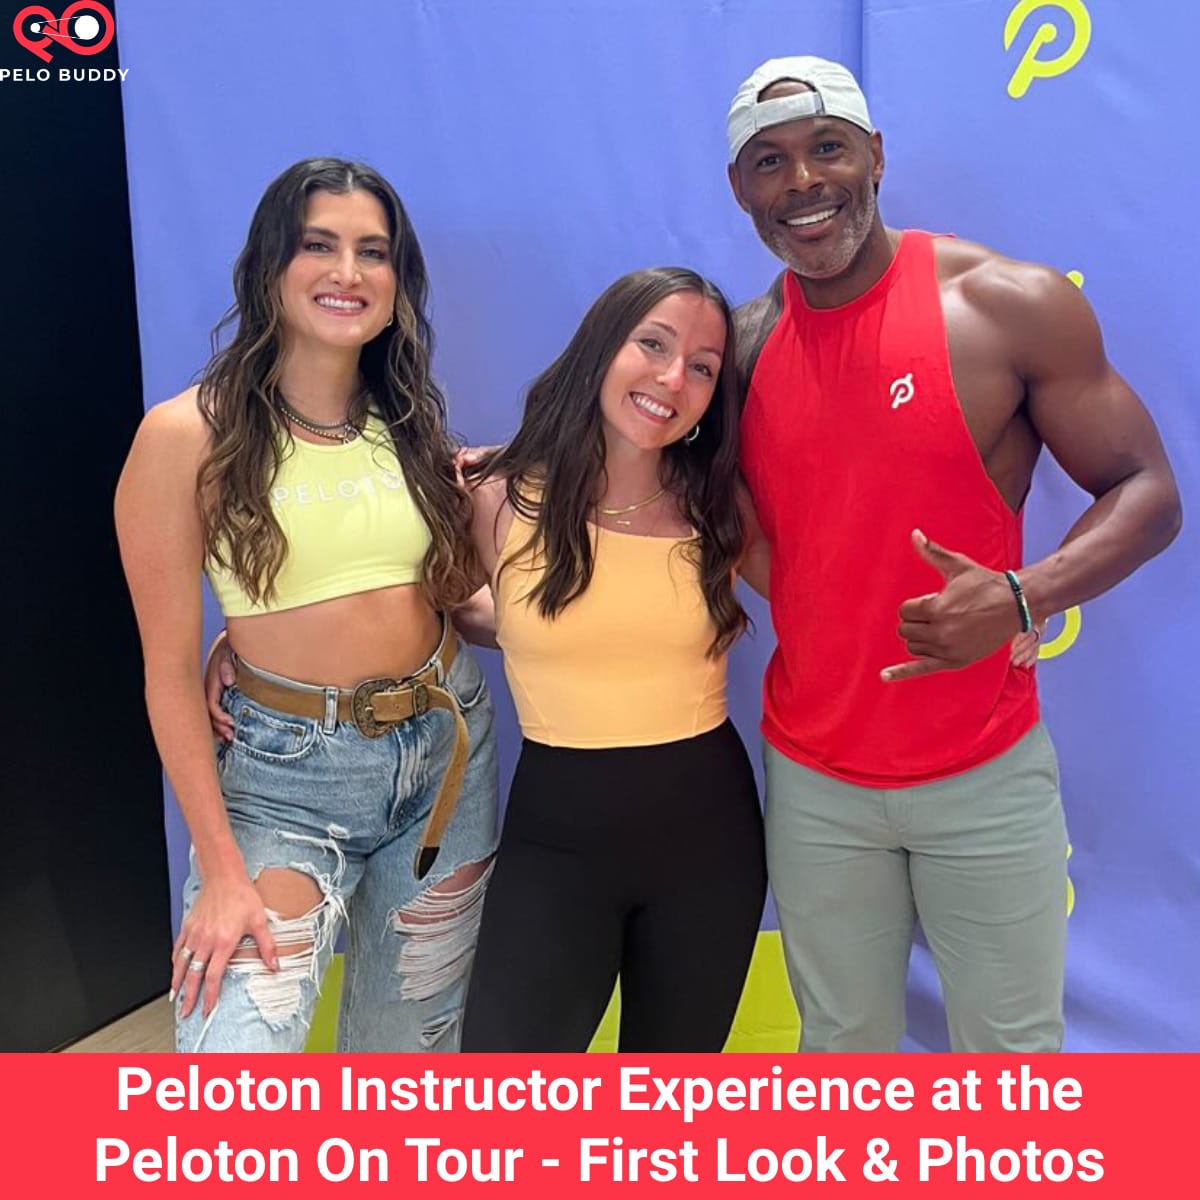 Peloton Instructor Experience for Peloton On Tour: What is it? What to  Expect? Details from First Event in Los Angeles - Peloton Buddy